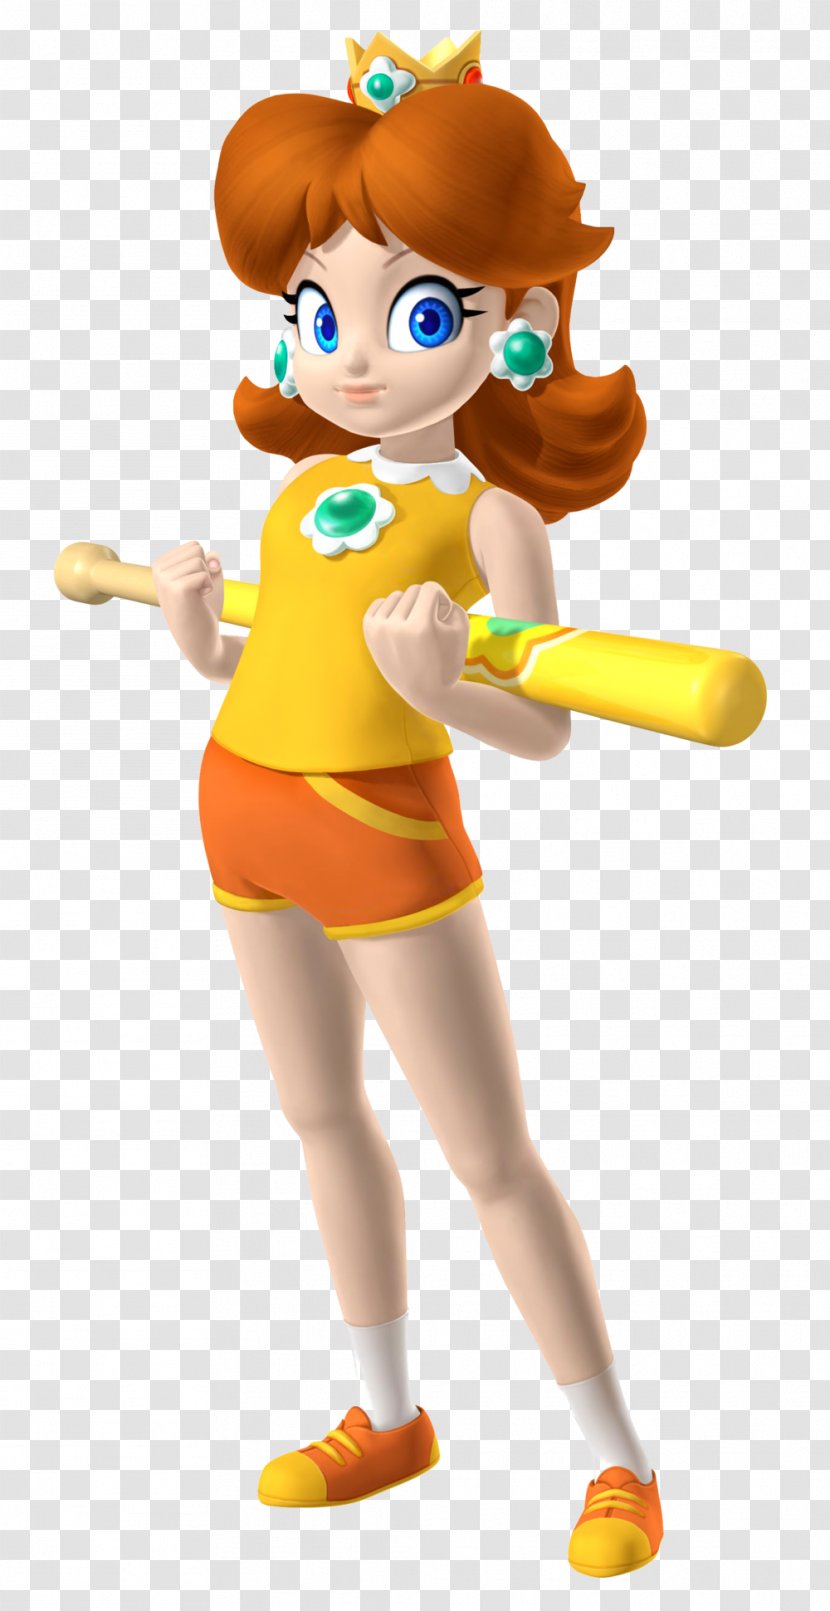 Mario & Sonic At The Olympic Games Sports Superstars Princess Daisy Mix Peach - Mascot Transparent PNG